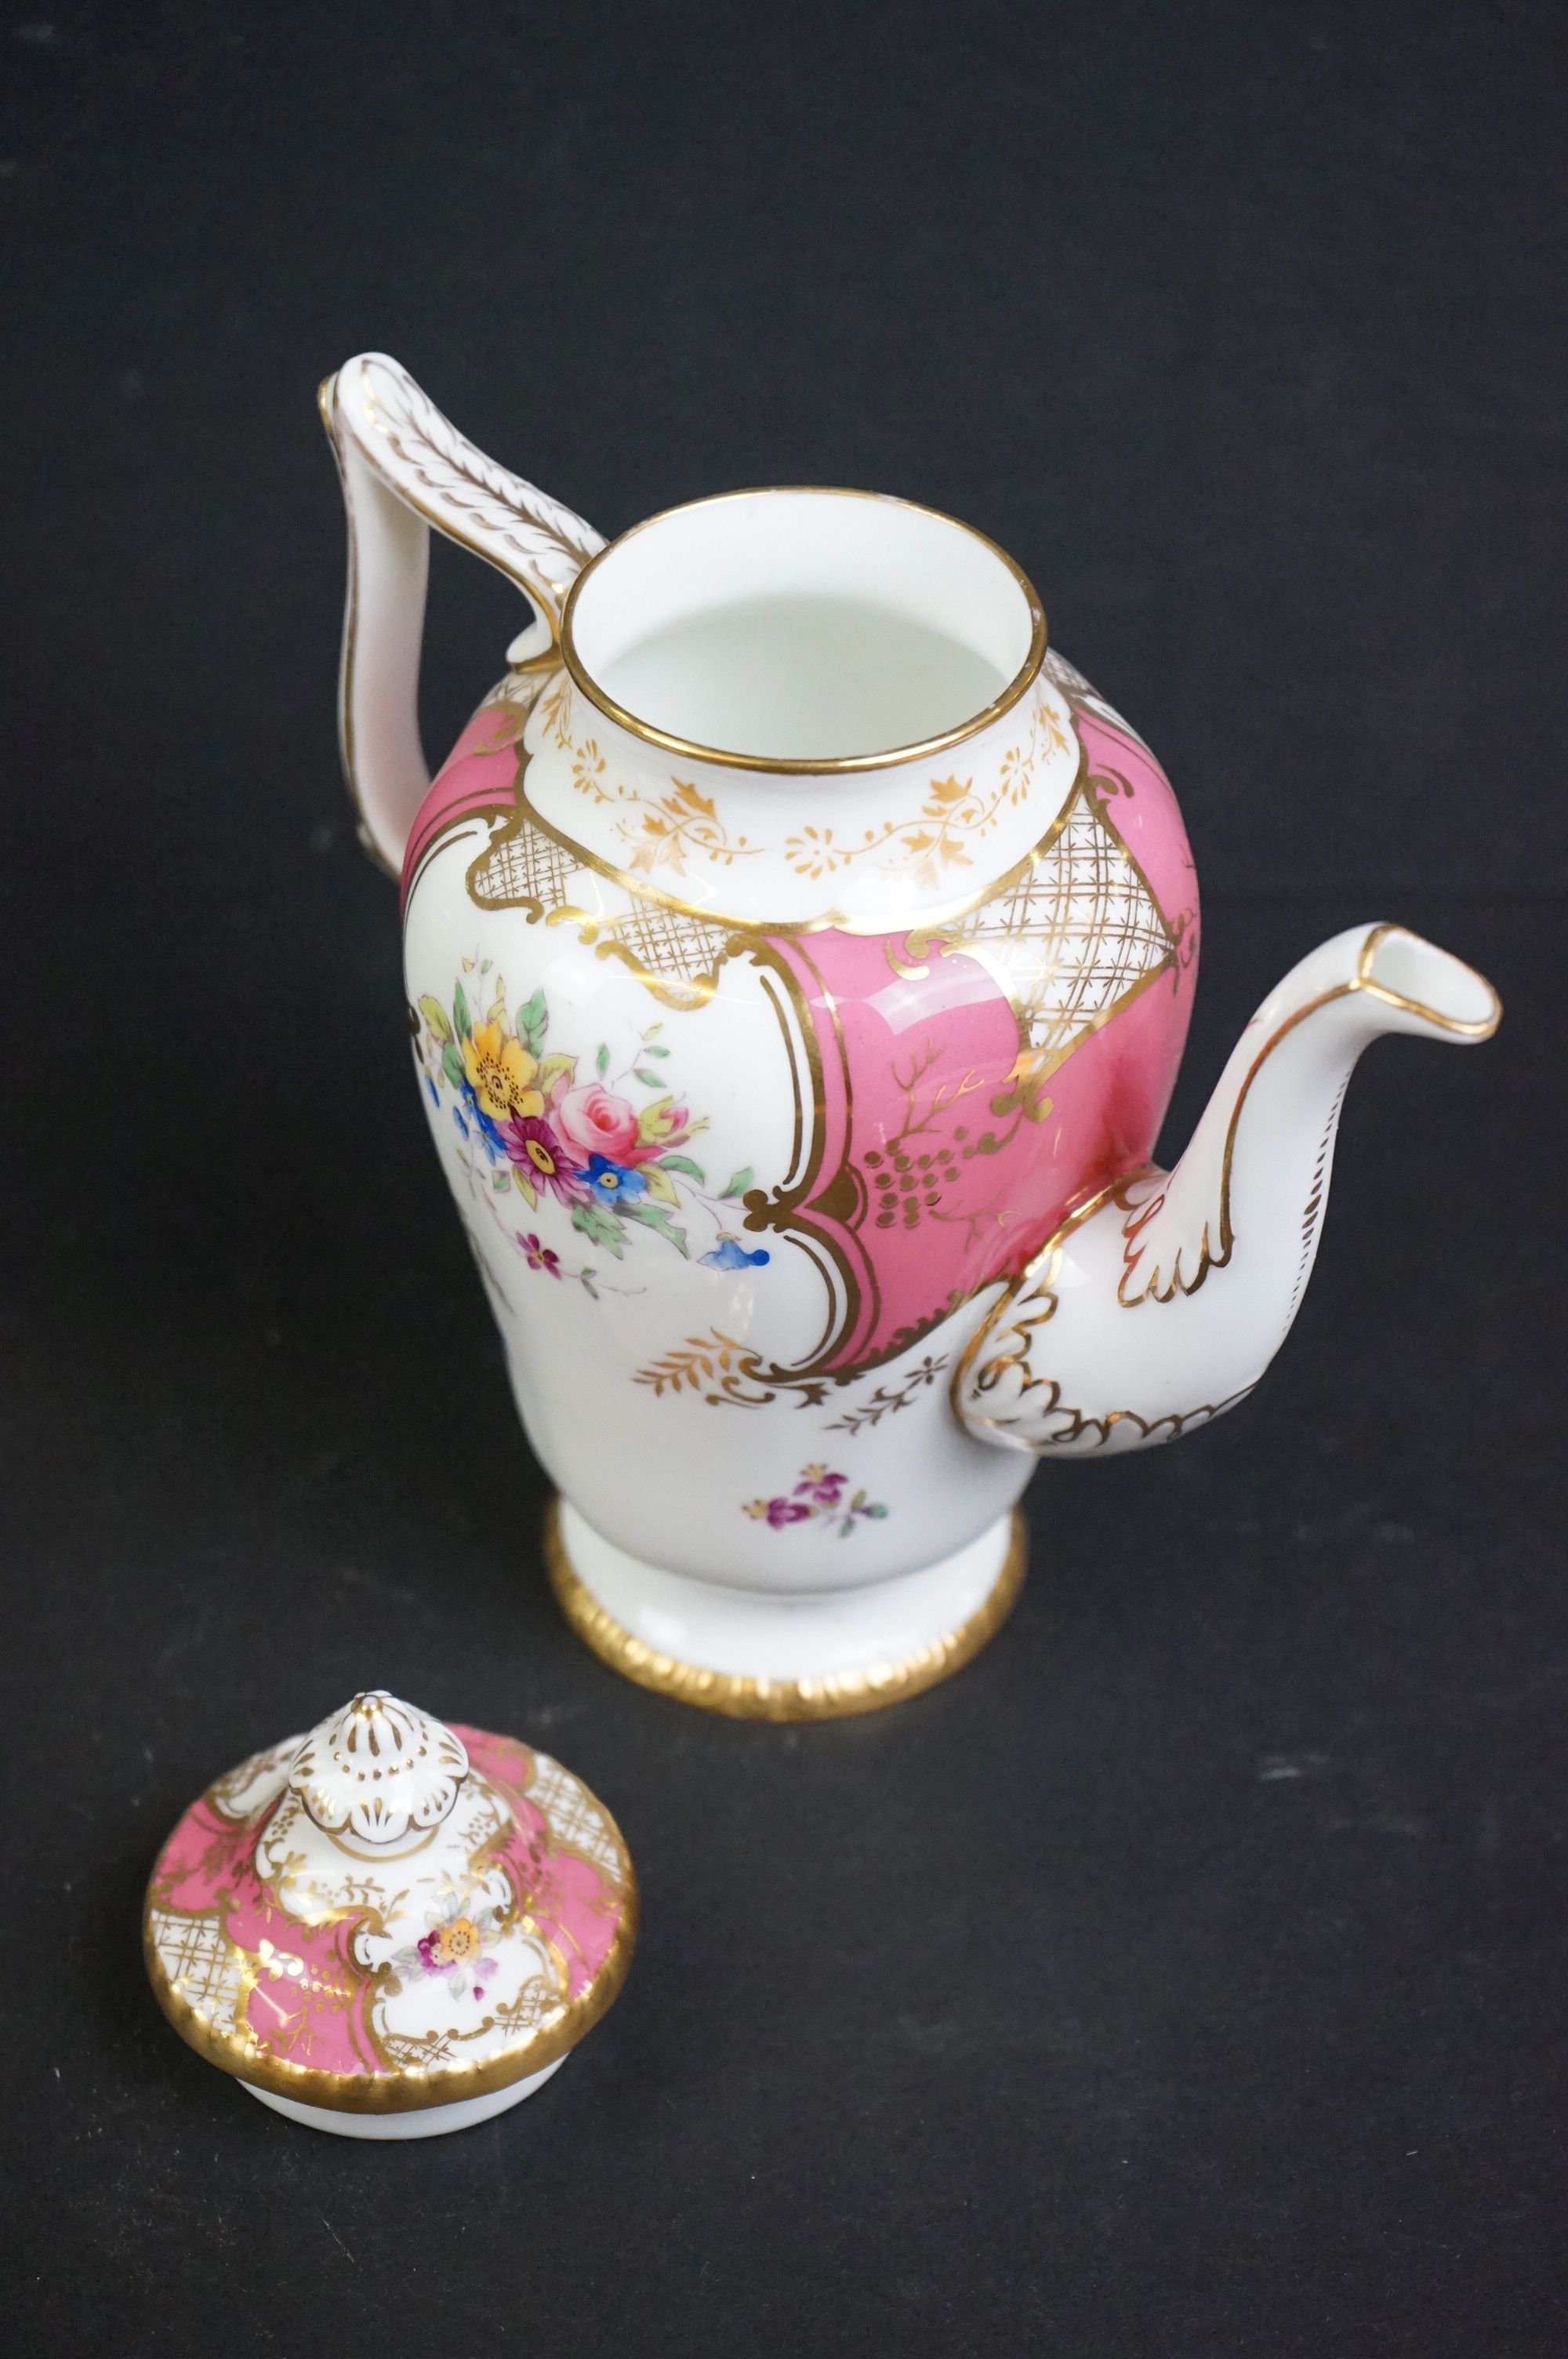 Early 20th century Coalport Cabinet part Coffee Set decorated in pink and gilt with floral sprays - Image 3 of 24